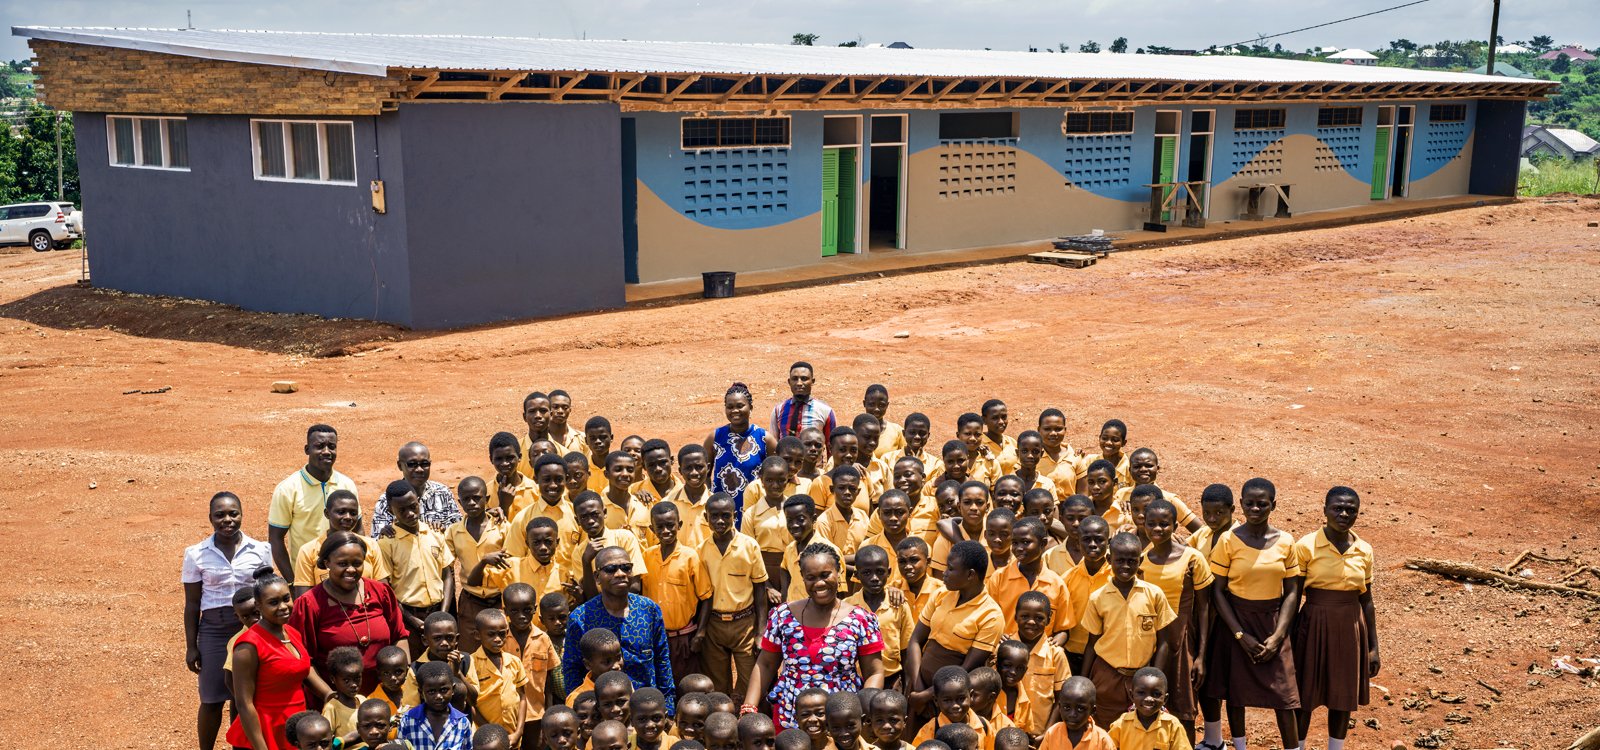 Local Sandvik leadership was able to finance construction of a six-classroom block, and the new classrooms were ready by early 2018.